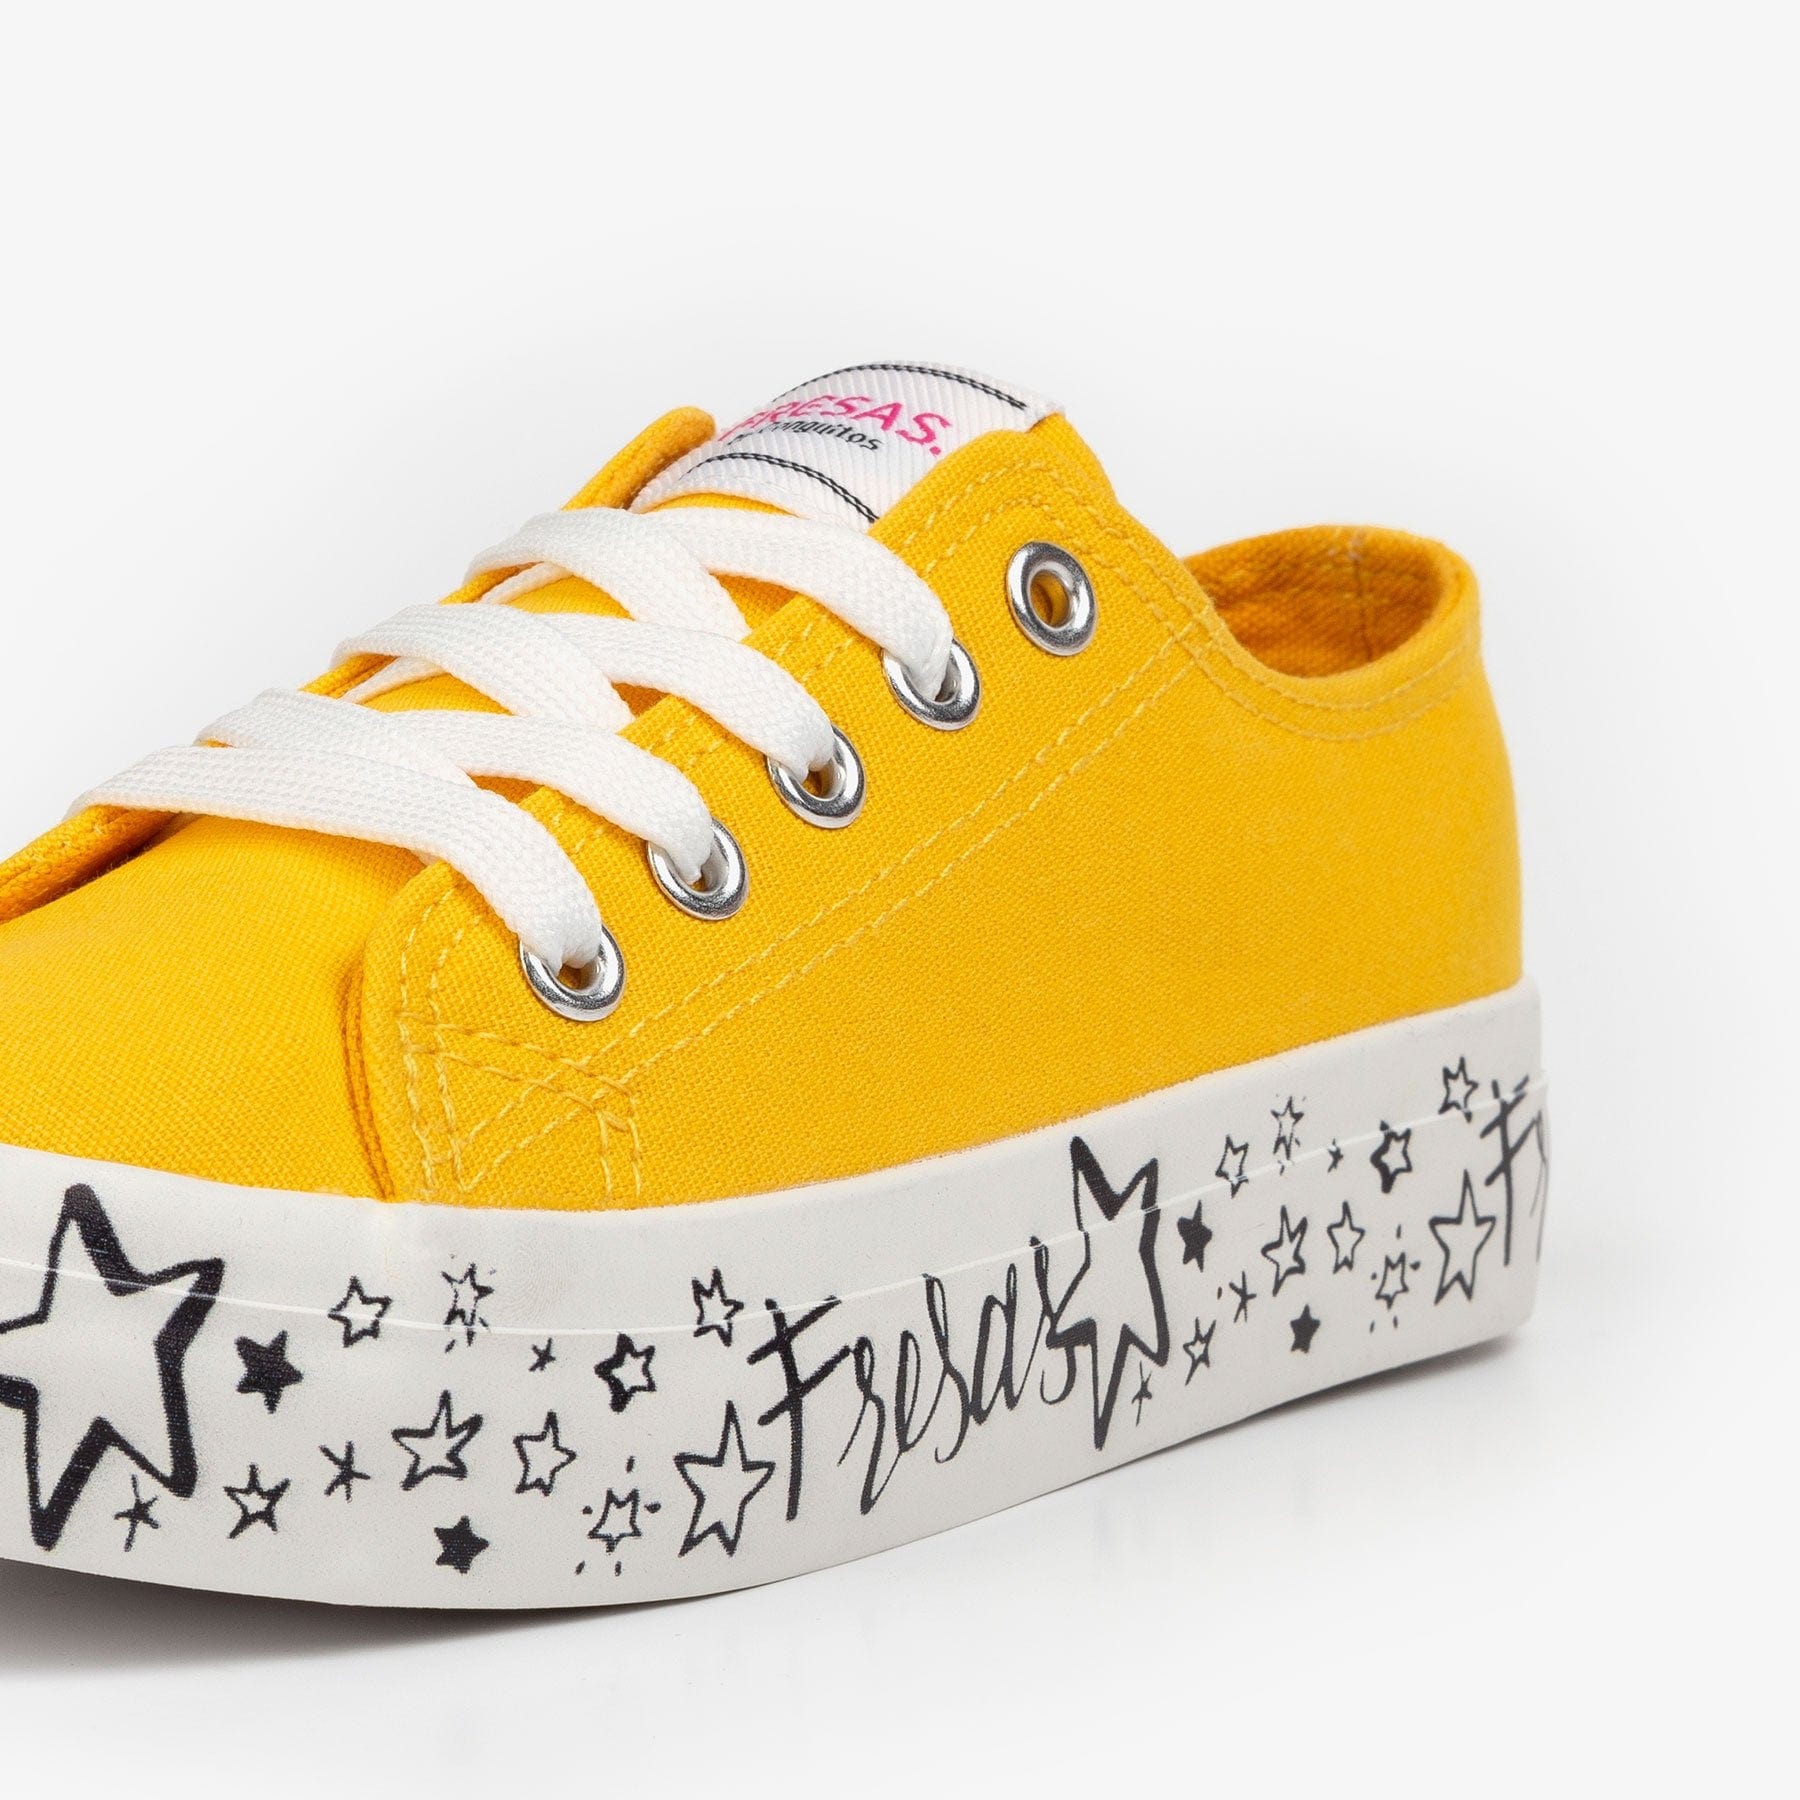 FRESAS CON NATA Shoes Girl's Yellow Printed Canvas Sneakers